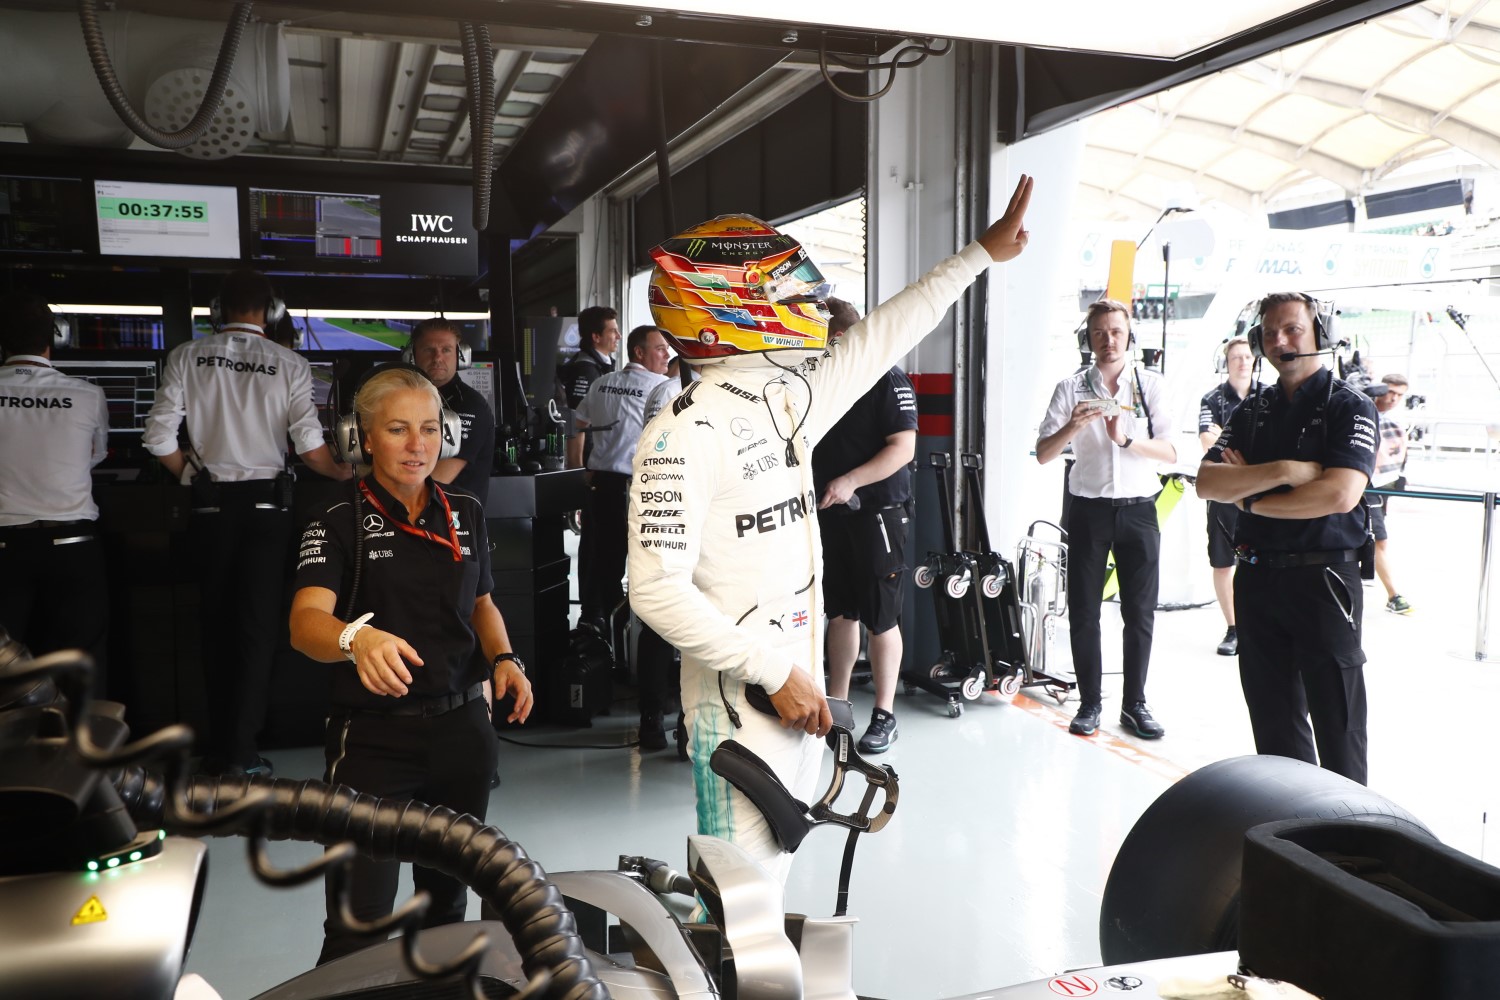 Hamilton waves to his fans